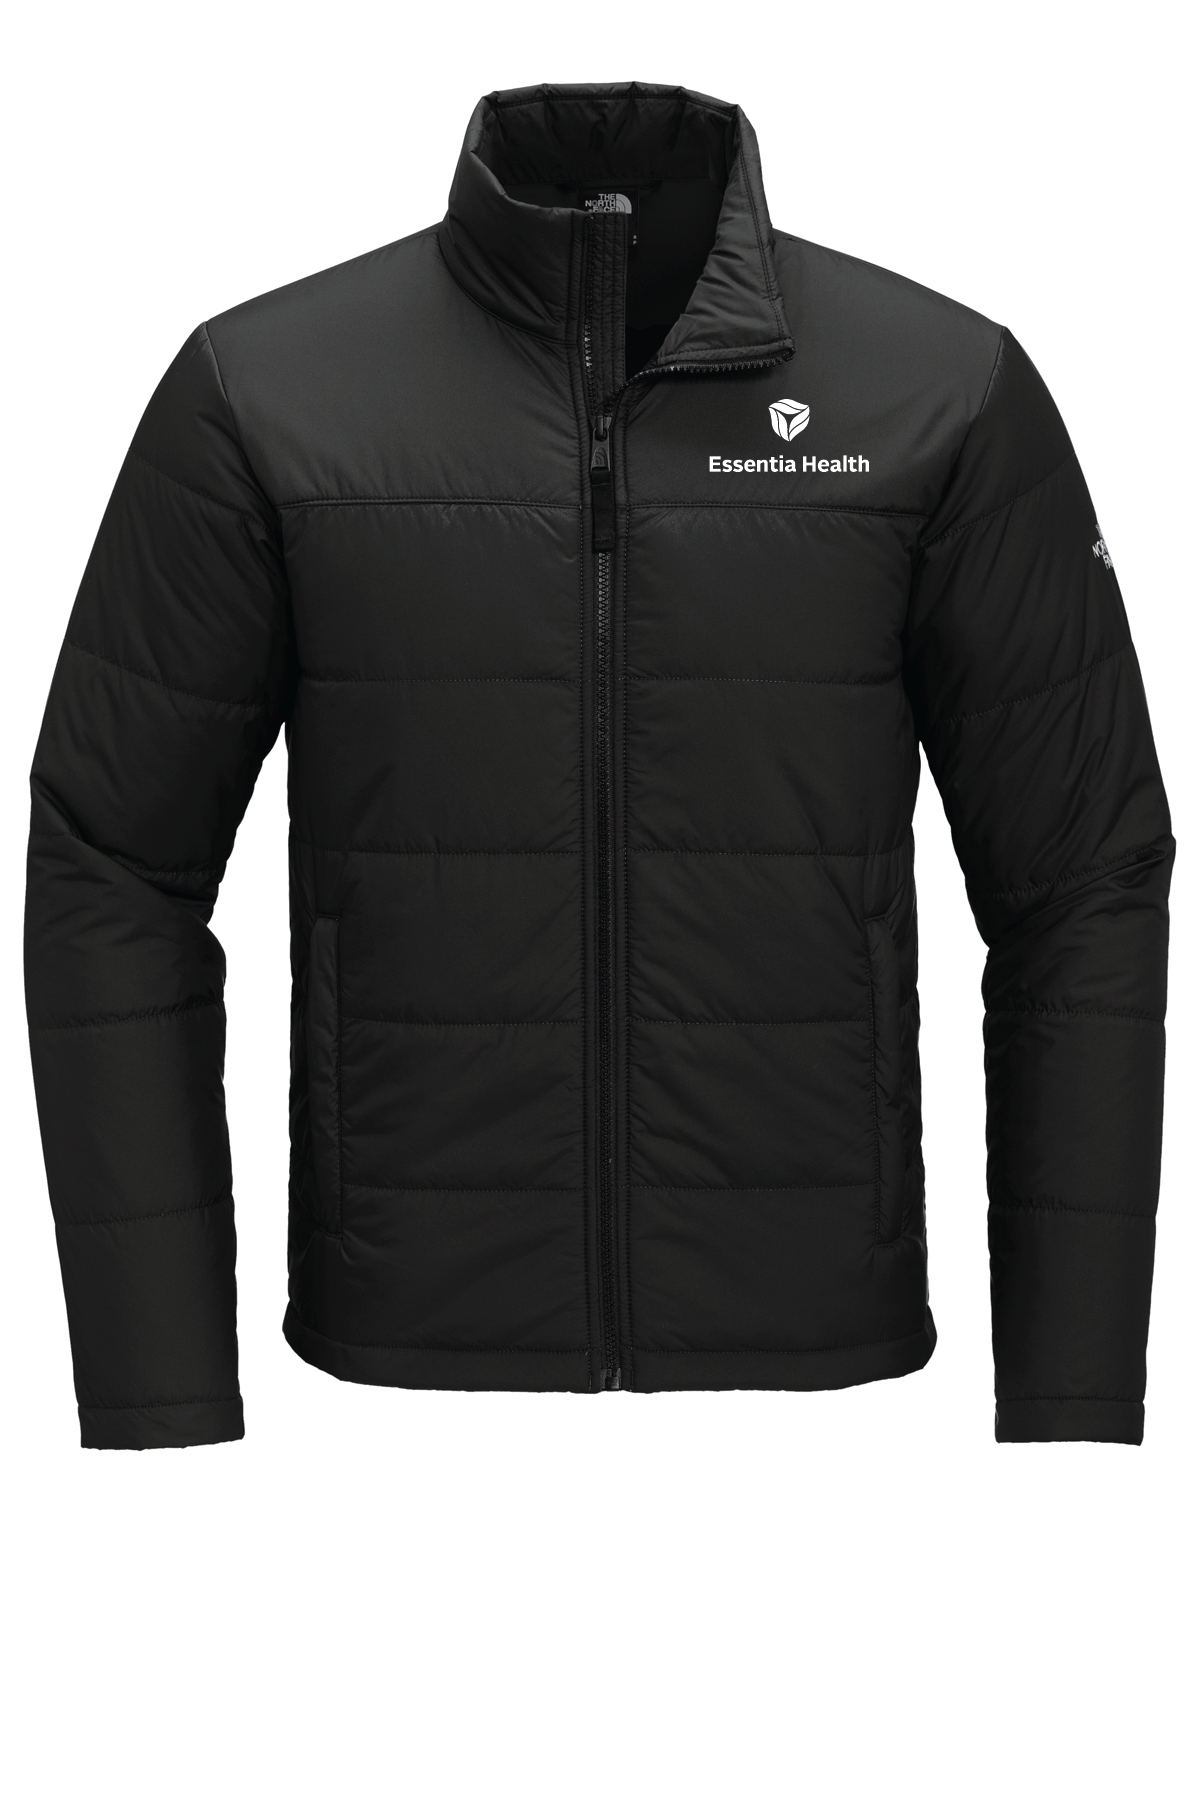 Essentia Health The North Face Everyday Insulated Jacket - DSP On Demand